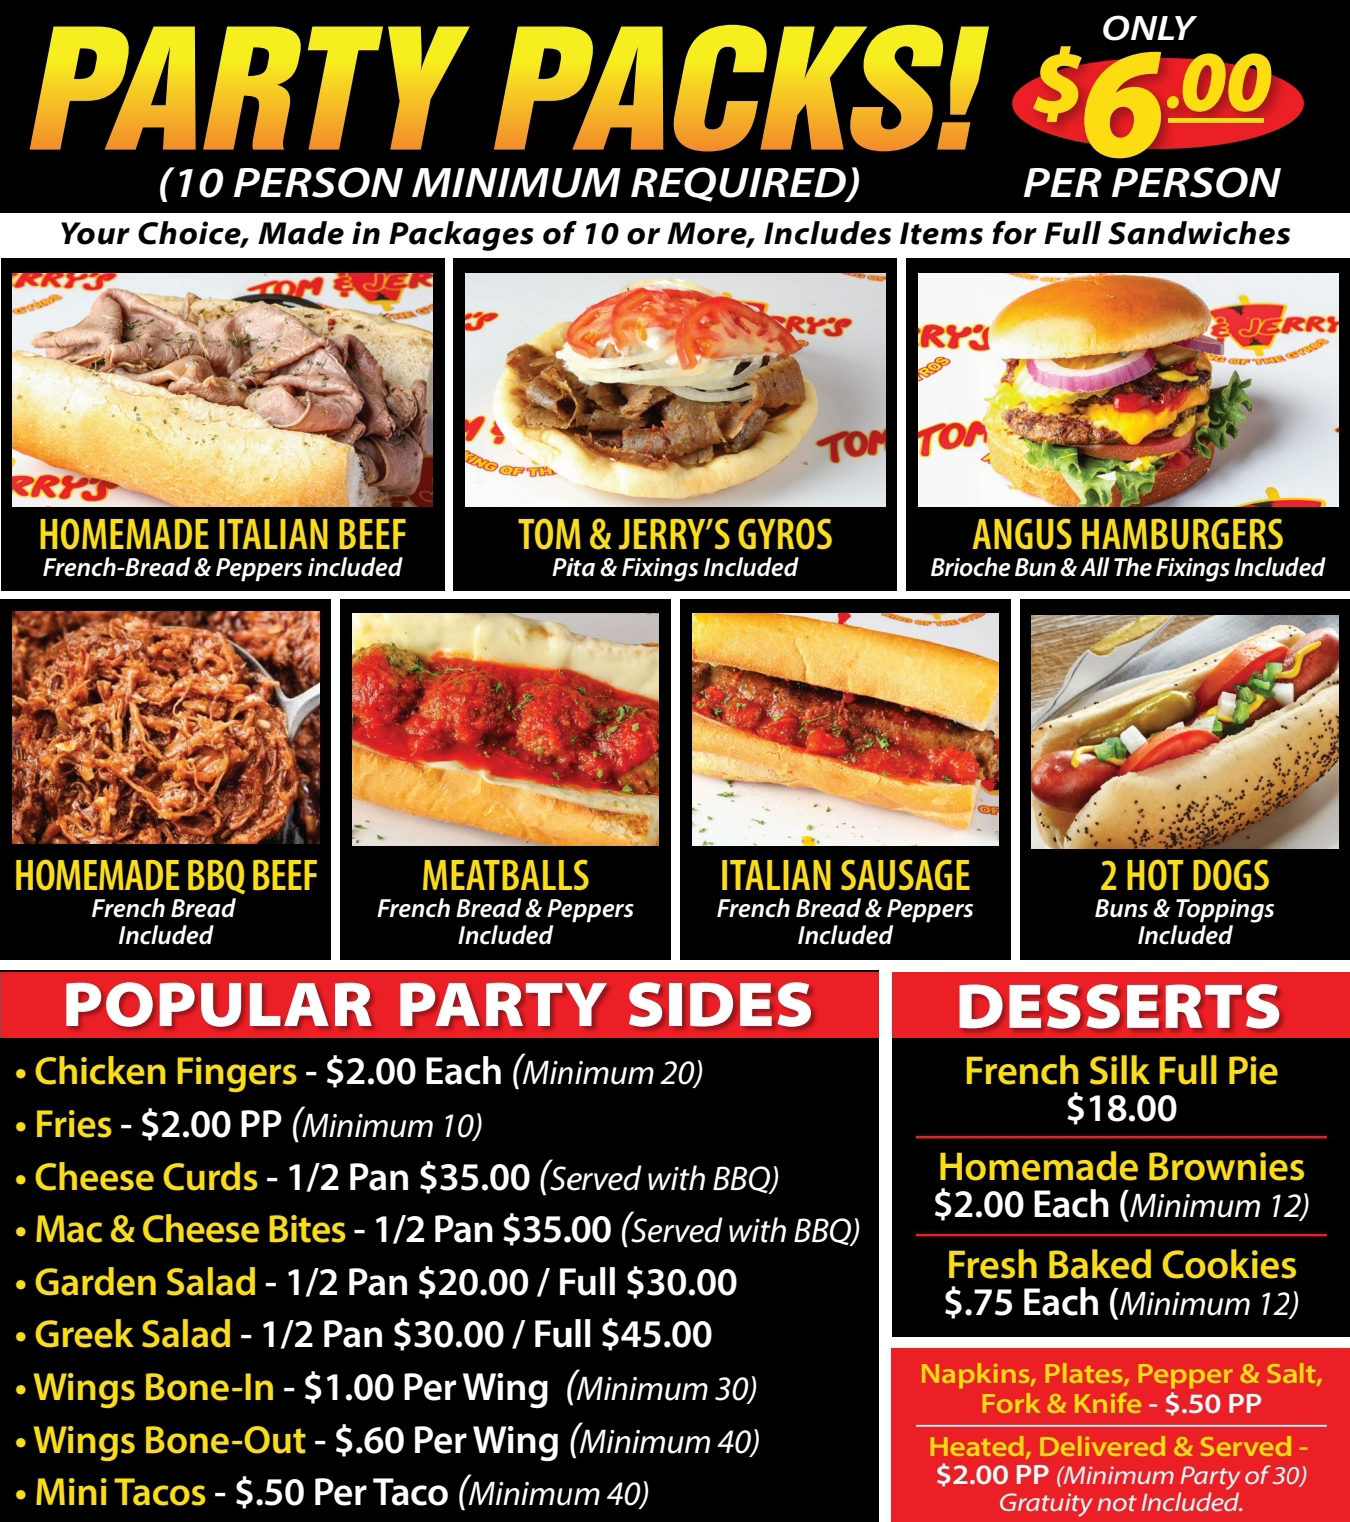 Catering Party Packs